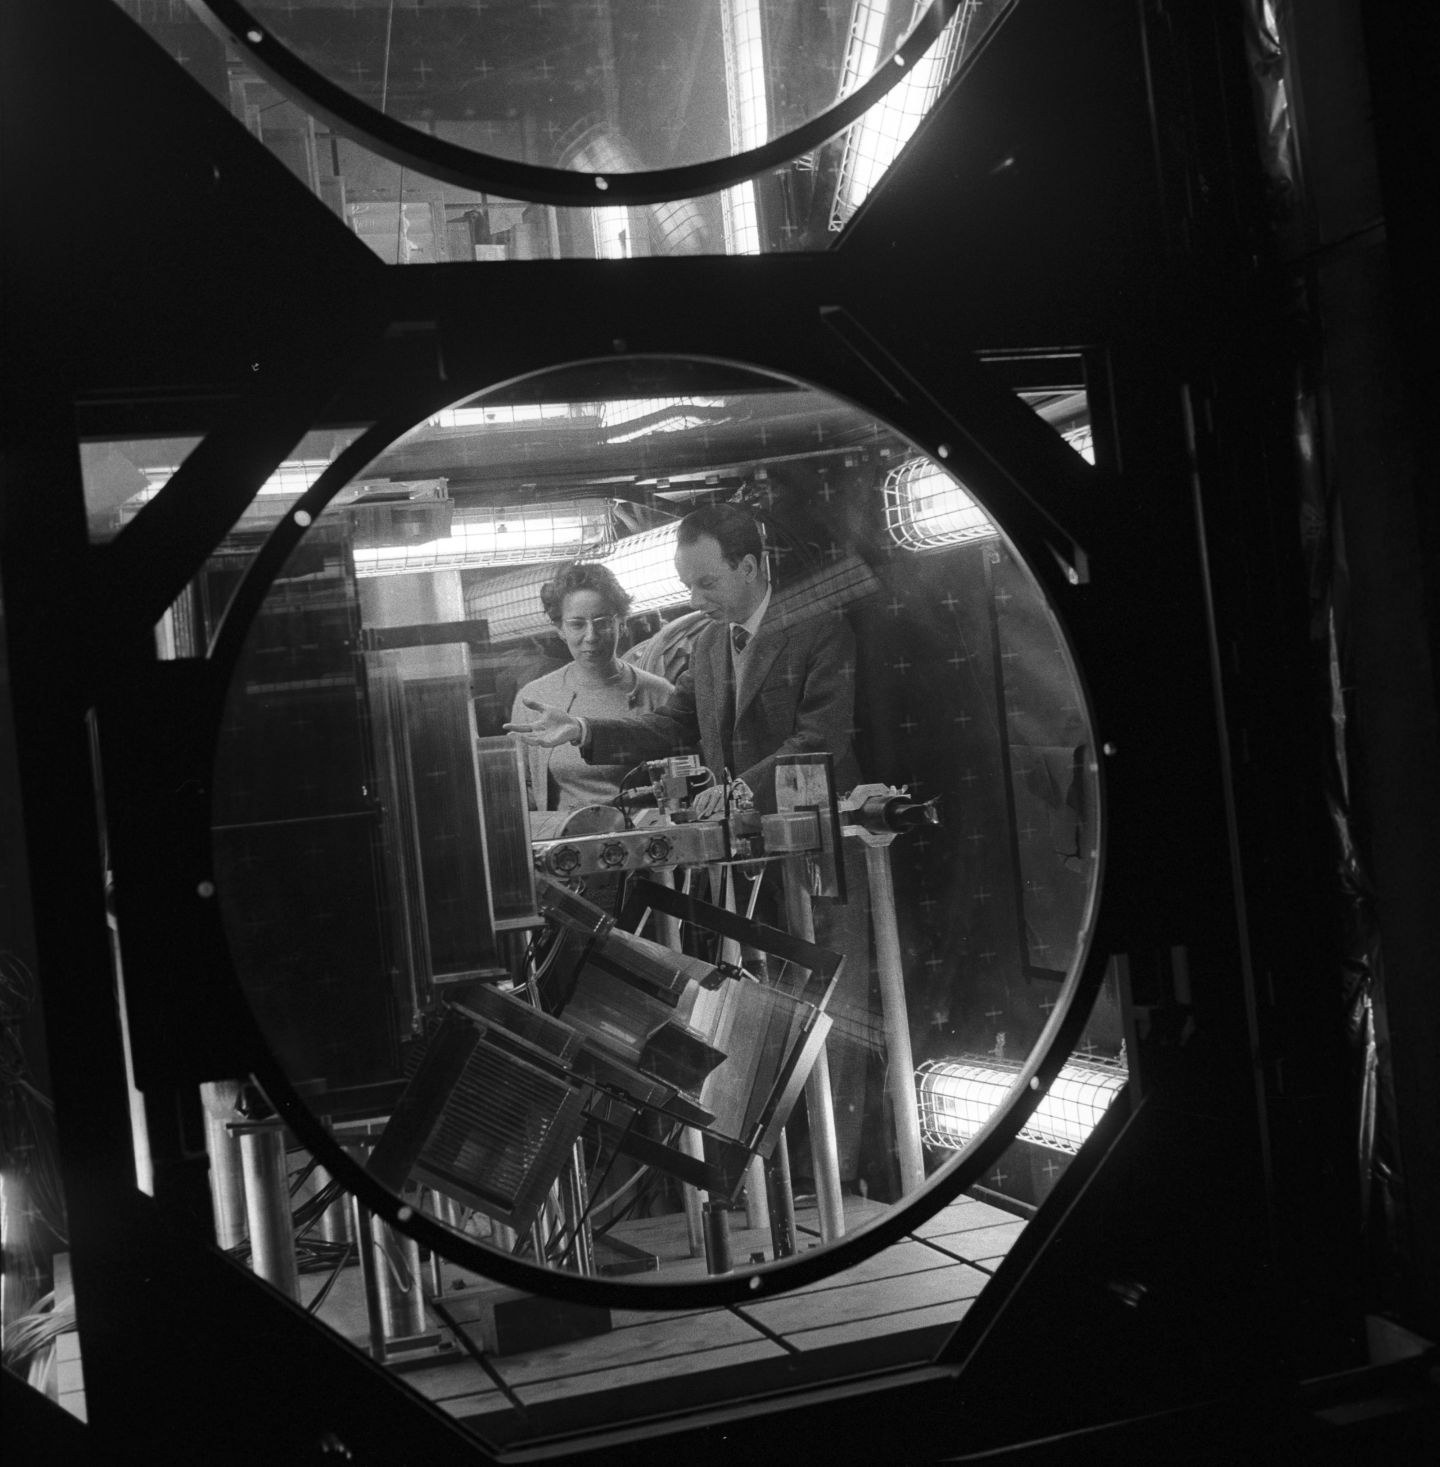 Giuseppe Fidecaro, who was part of the team that made CERN’s first discovery, is pictured here some years later with Maria Fidecaro, as they carry out an experiment at CERN’s second accelerator. (Image: CERN)